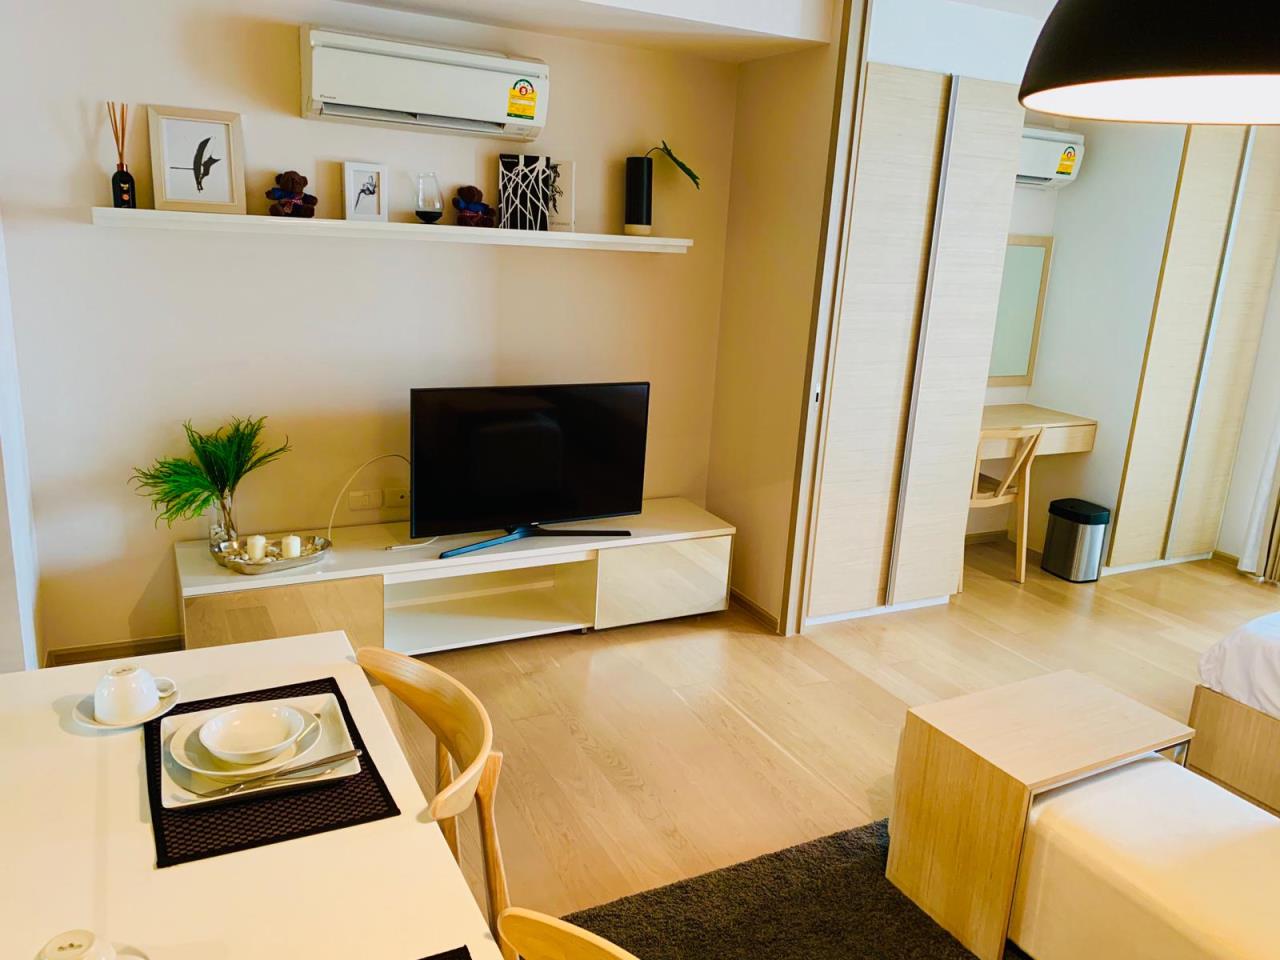 1 Bedroom, 1 Bathroom 38sqm size Liv At 49 for Rent 25,000THB